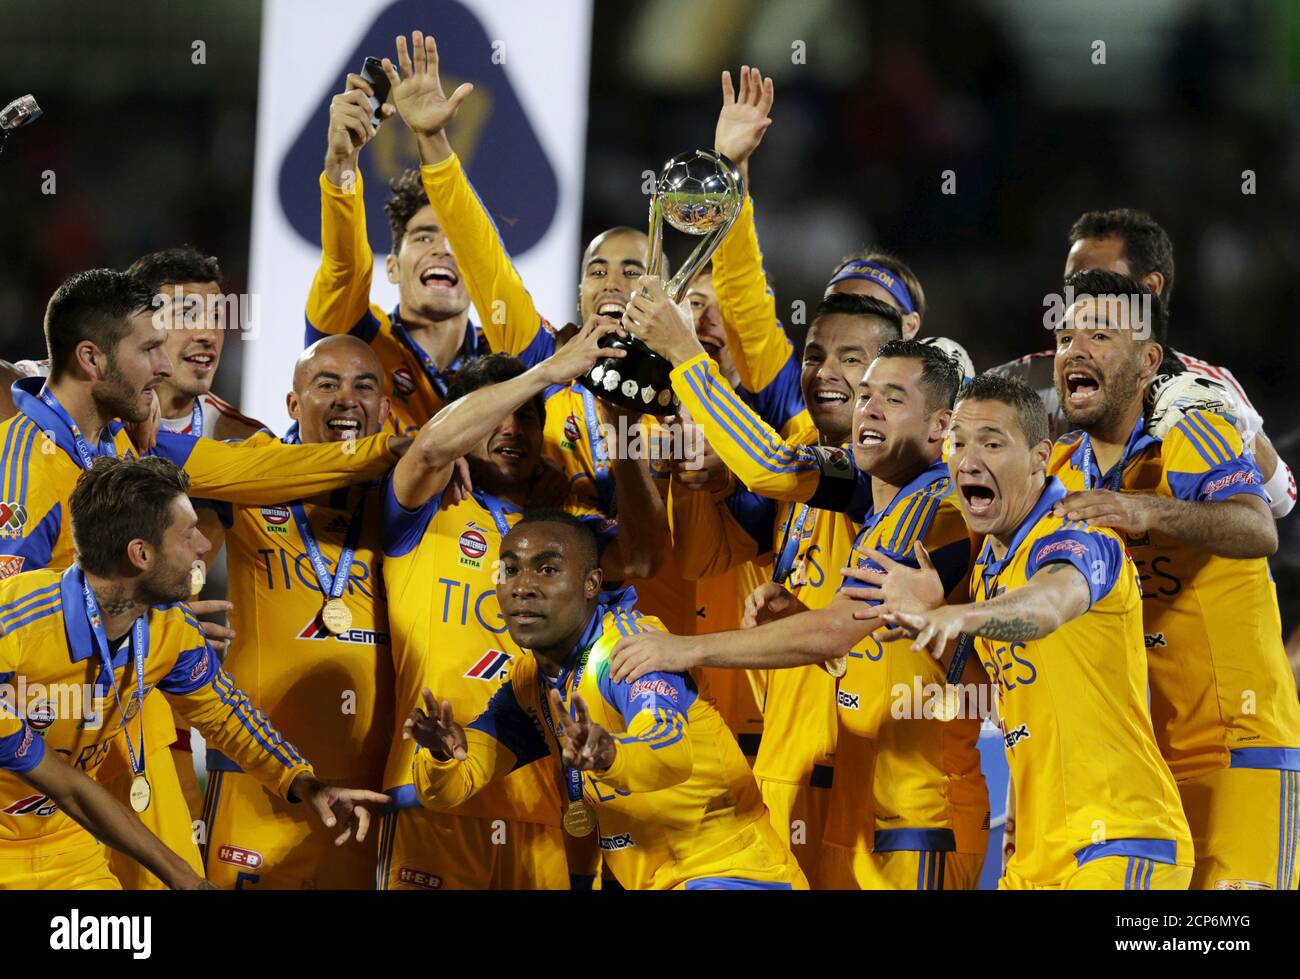 Football Soccer - Tigres v Pumas - The first leg of their Mexican first  division final soccer match - Universitario stadium, Monterrey, Mexico -  10/12/15 Tigres' Andre-Pierre Gignac celebrates their victory against